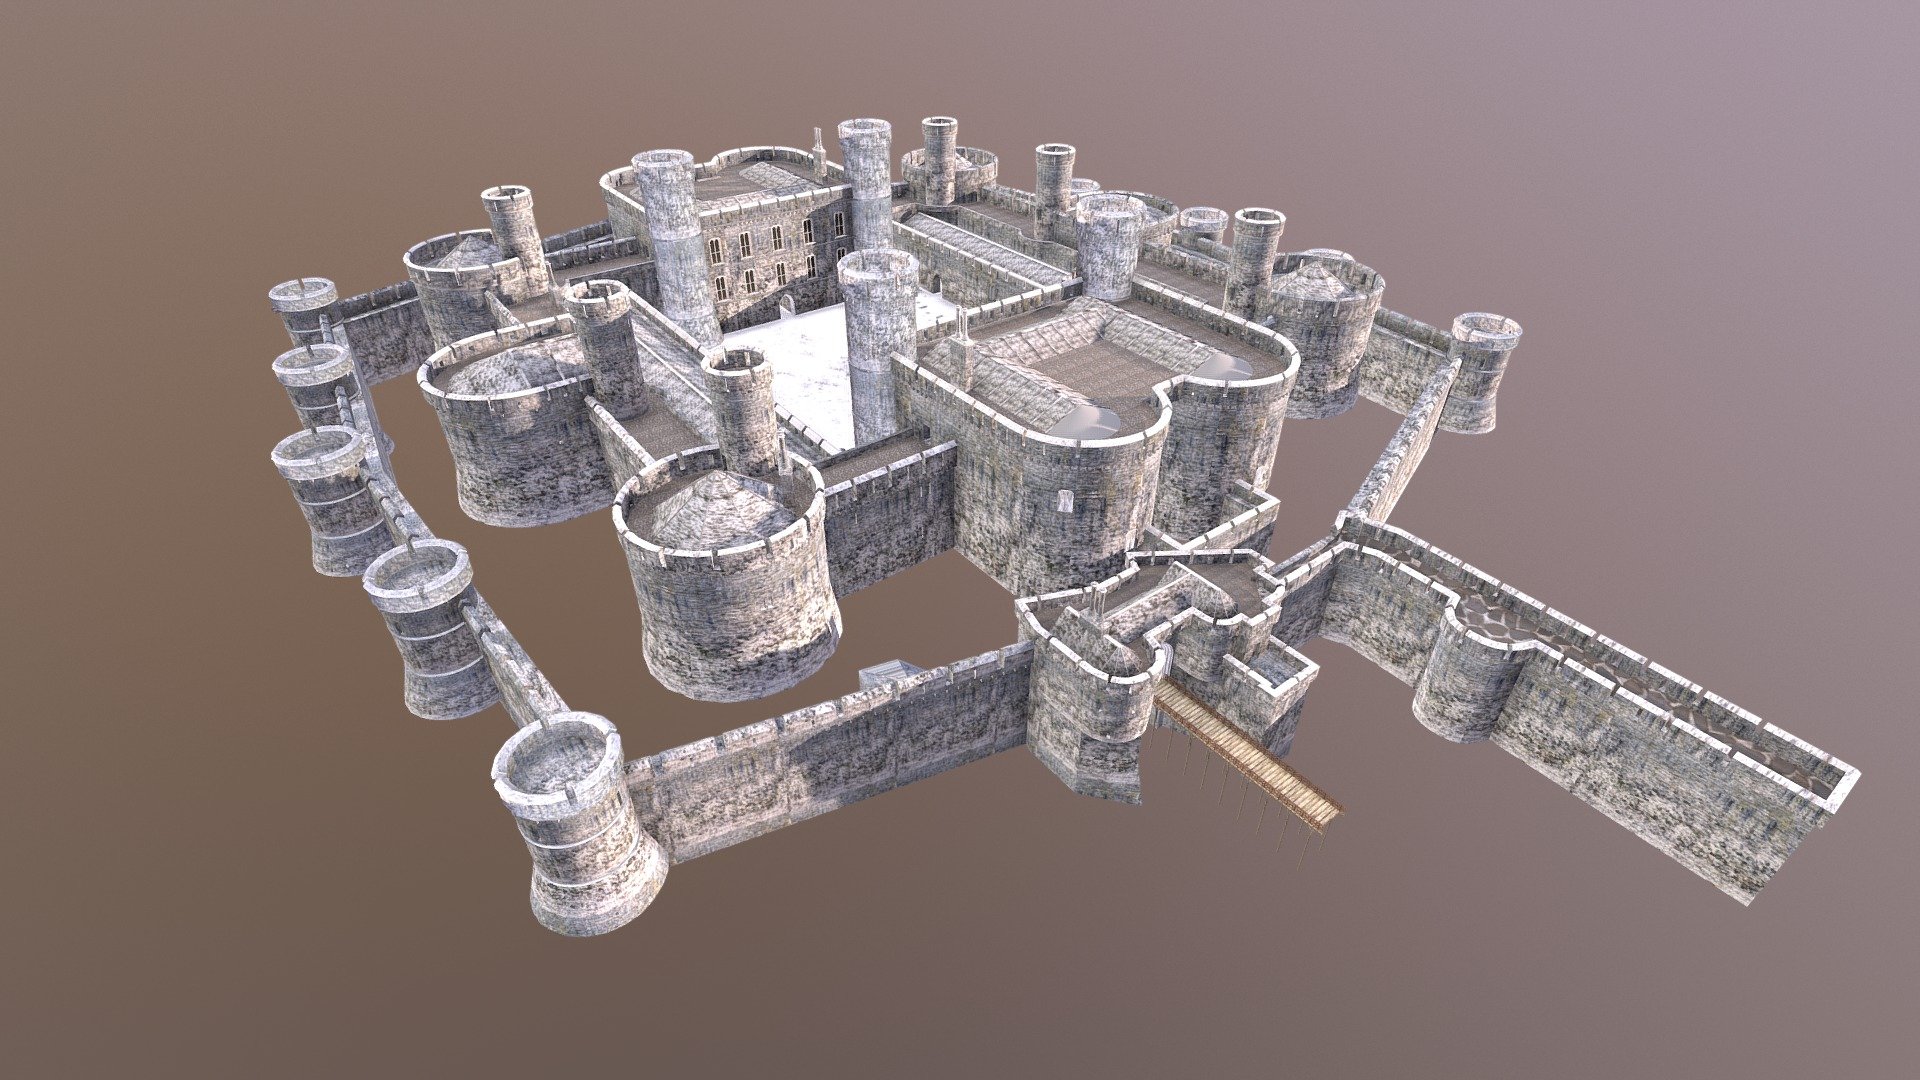 Quick model upload of our Beaumaris Castle. Made in 3DS Max, this model is part of a VR scene we are making. See the footage https://www.youtube.com/watch?v=bhmev8_wX-M

This castle was built by King Edward but ran out of funds to complete due to the threat from the Scots. Today, this castle is only half complete and owned by the Welsh heritage body, CADW 3d model